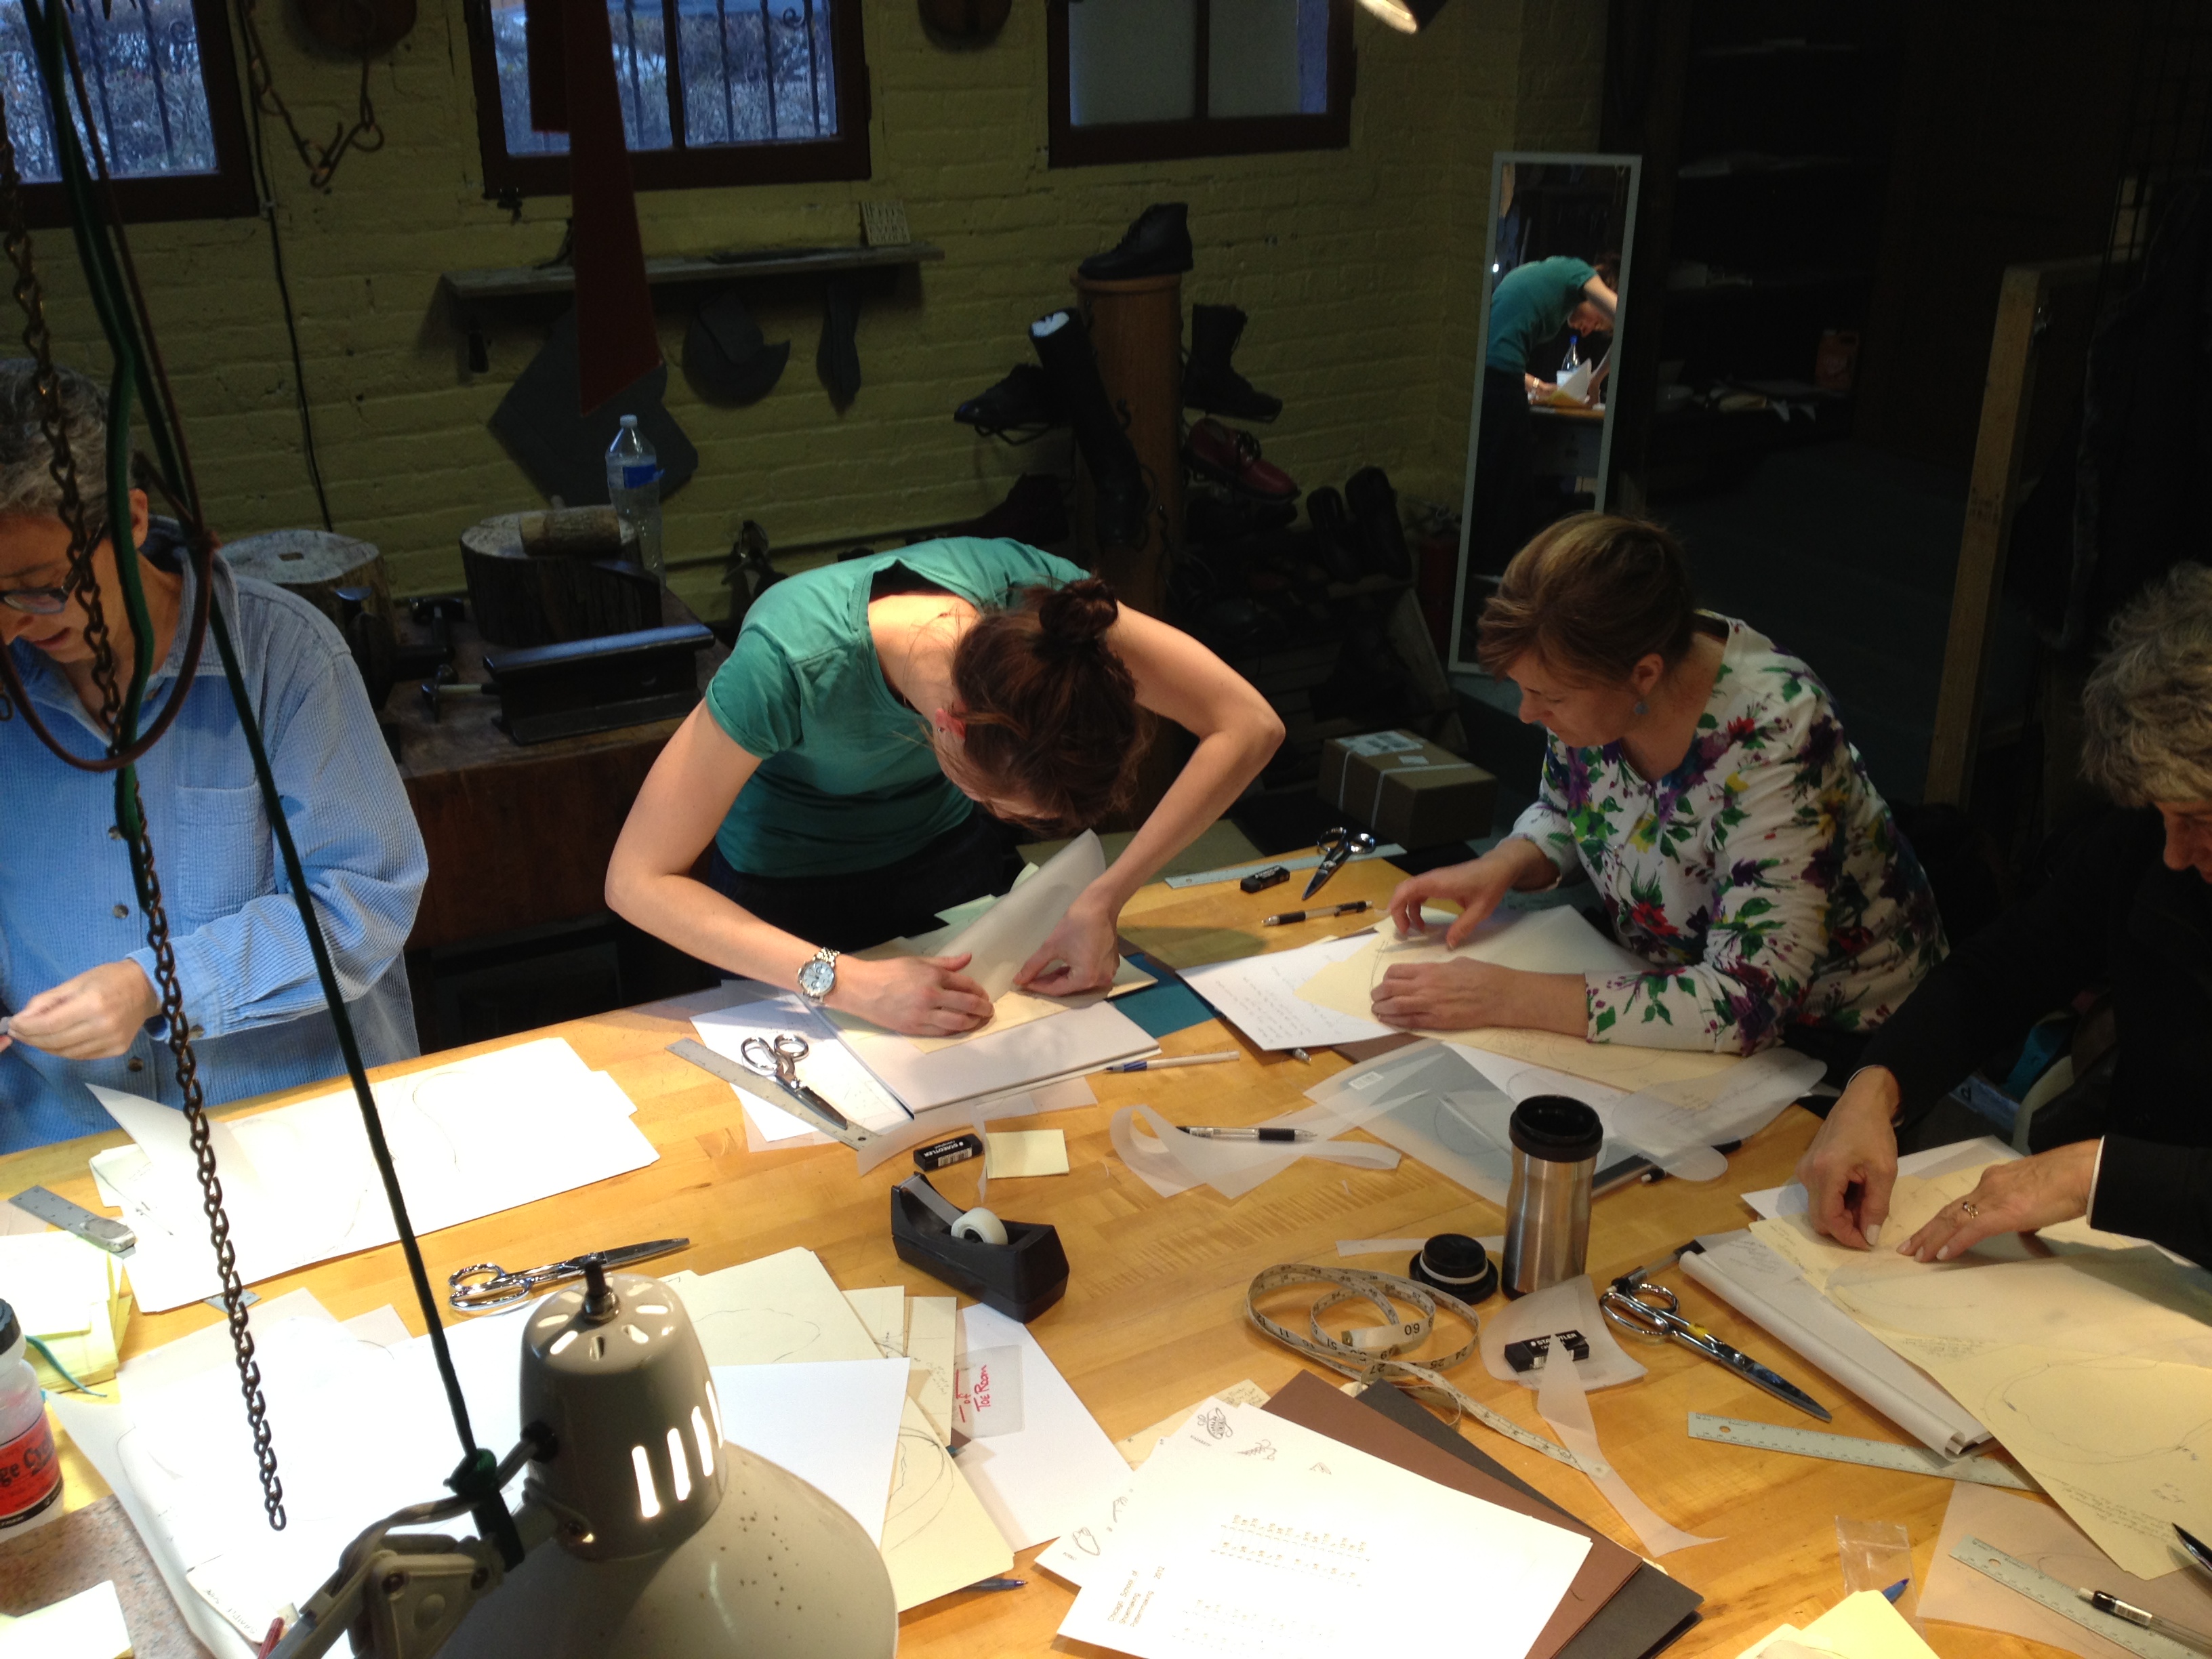 Pattern Making/Shoes | Chicago School of Shoemaking